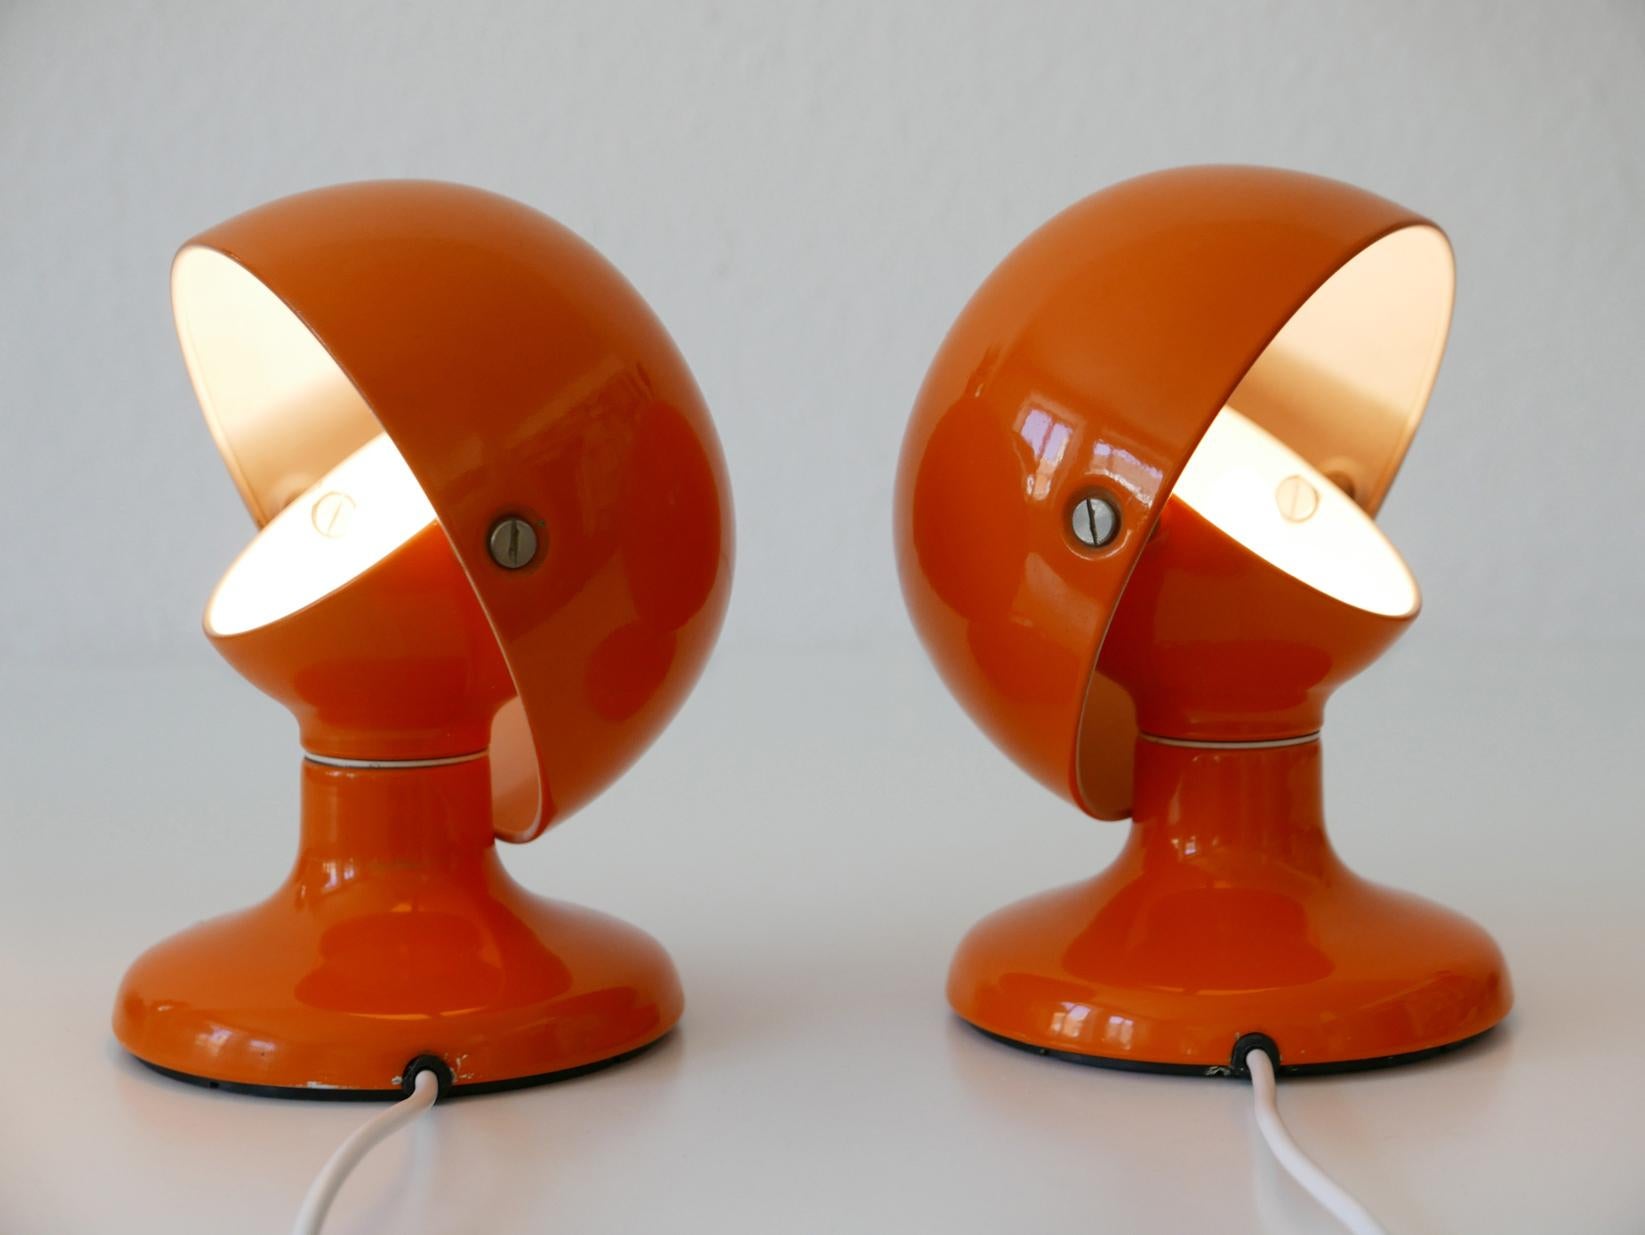 Pair of amazing Mid-Century Modern Jucker side table lamps. Designed by Afra & Tobia Scarpa, 1963. Manufactured by Flos, Italy, 1960s.

Executed in orange lacquered metal, each lamp comes with 1 x E14 Edison screw fit bulb holder, is rewired and in